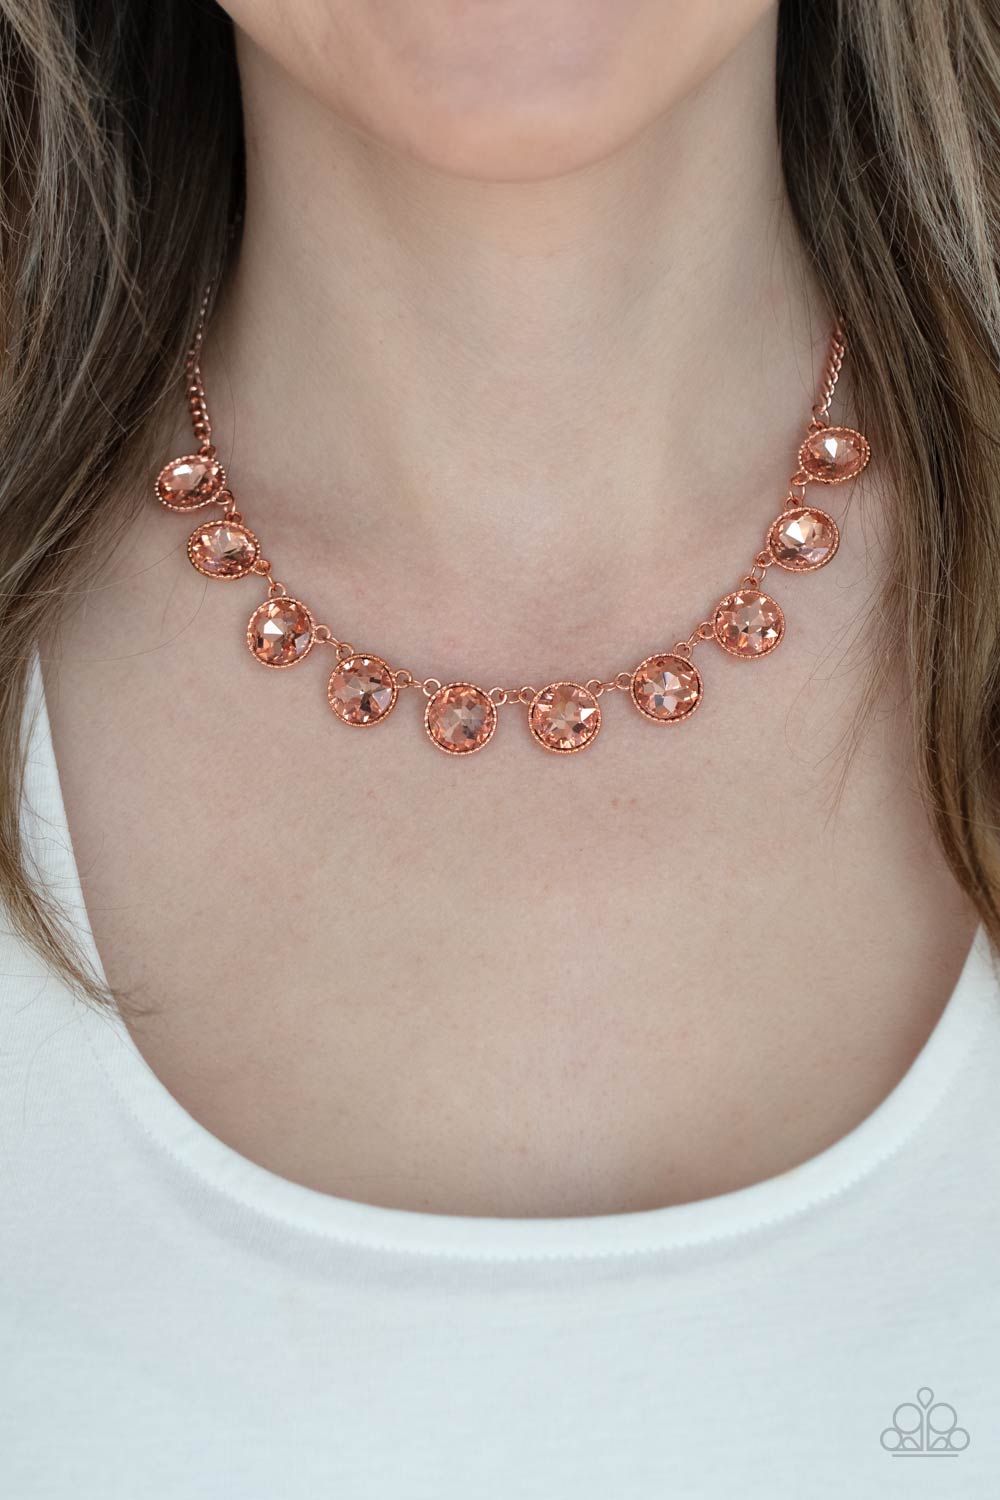 Mystical Majesty Copper Necklace - Paparazzi Accessories  Featuring a mystical iridescence, a sparkling display of round cut coppery gems are encased in delicately textured copper frames as they link below the collar, creating a majestic statement piece. Features an adjustable clasp closure.  All Paparazzi Accessories are lead free and nickel free!  Sold as one individual necklace. Includes one pair of matching earrings.